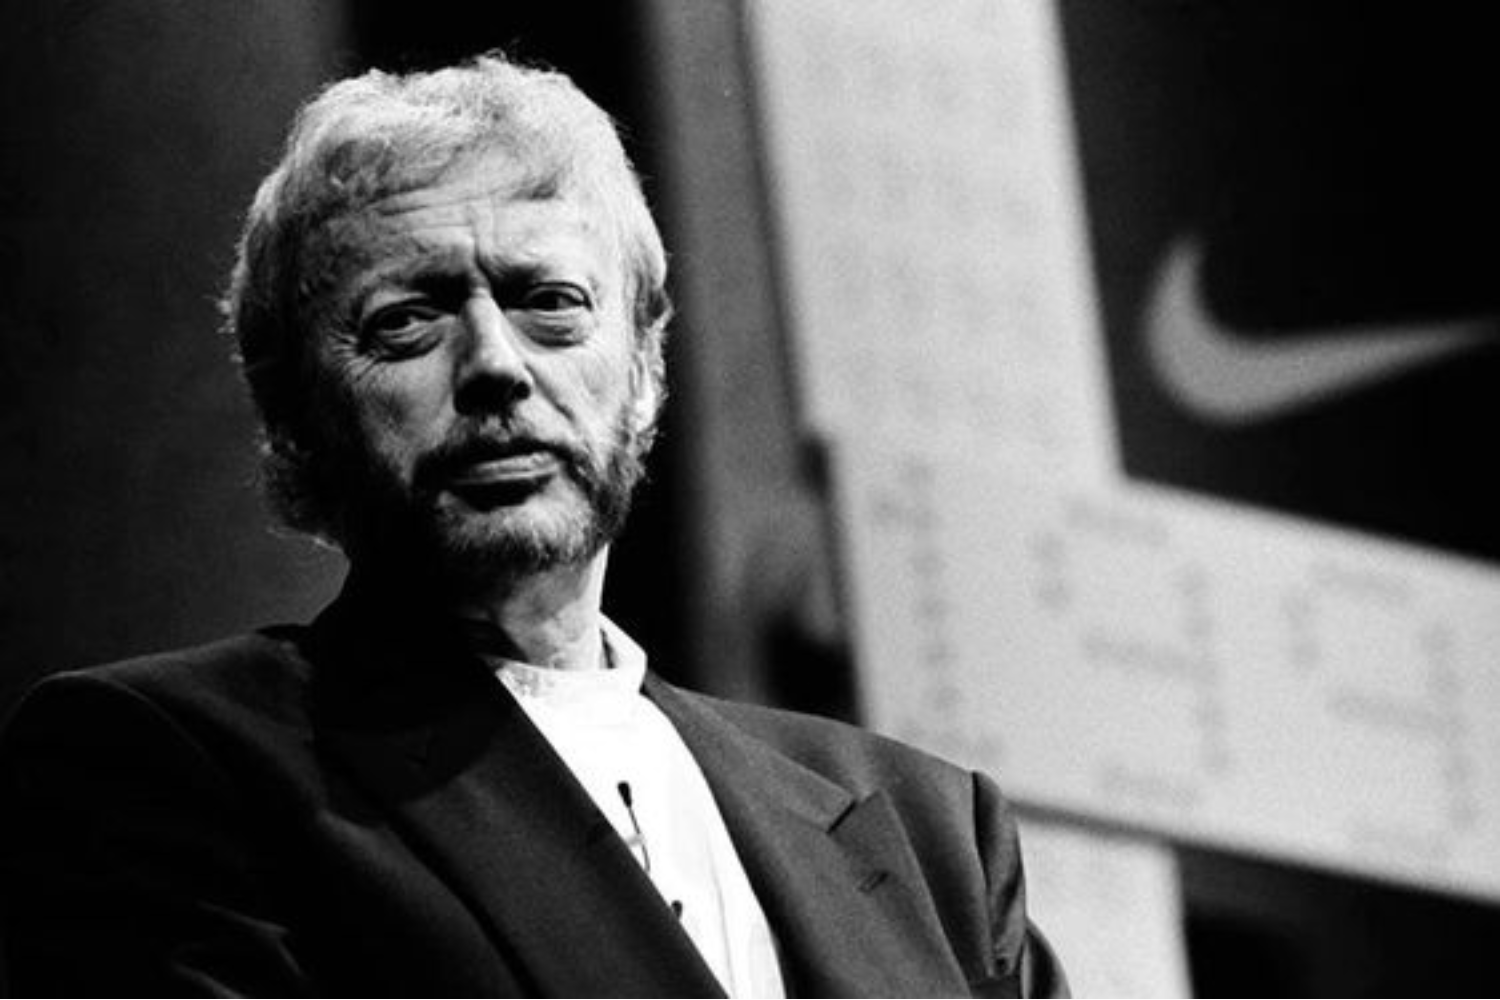 Nike founder Phil Knight celebrates his 86th birthday today